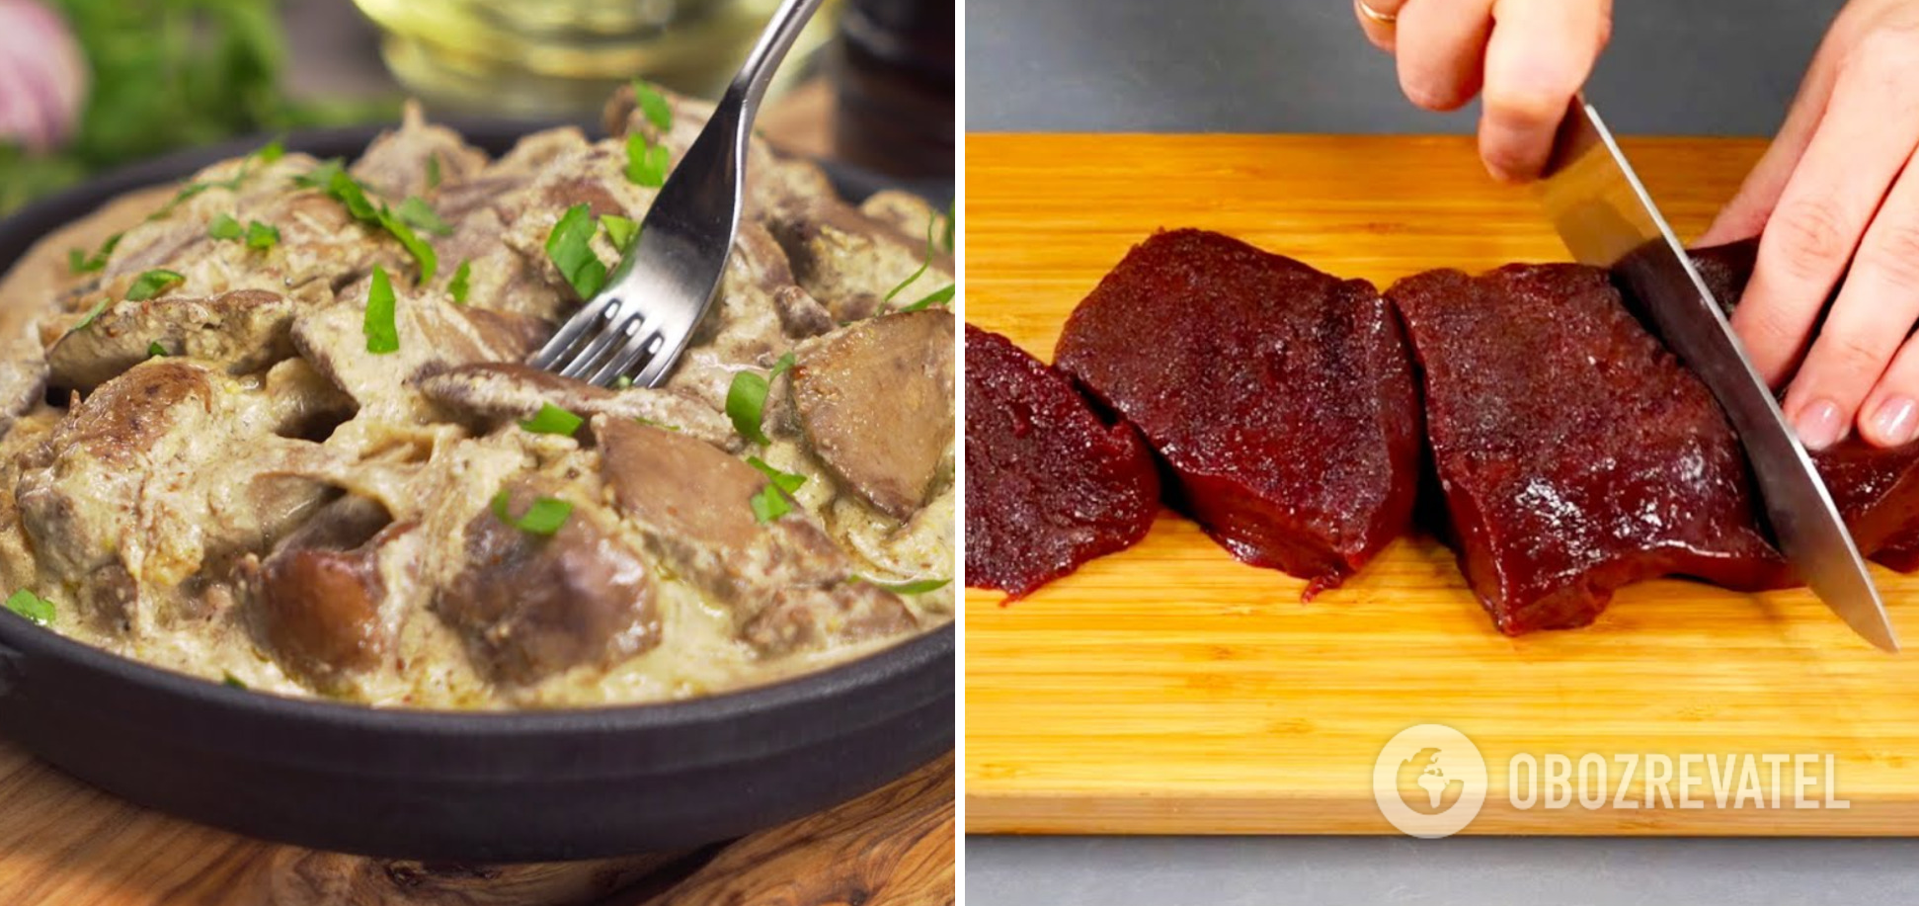 How to cook chicken liver properly